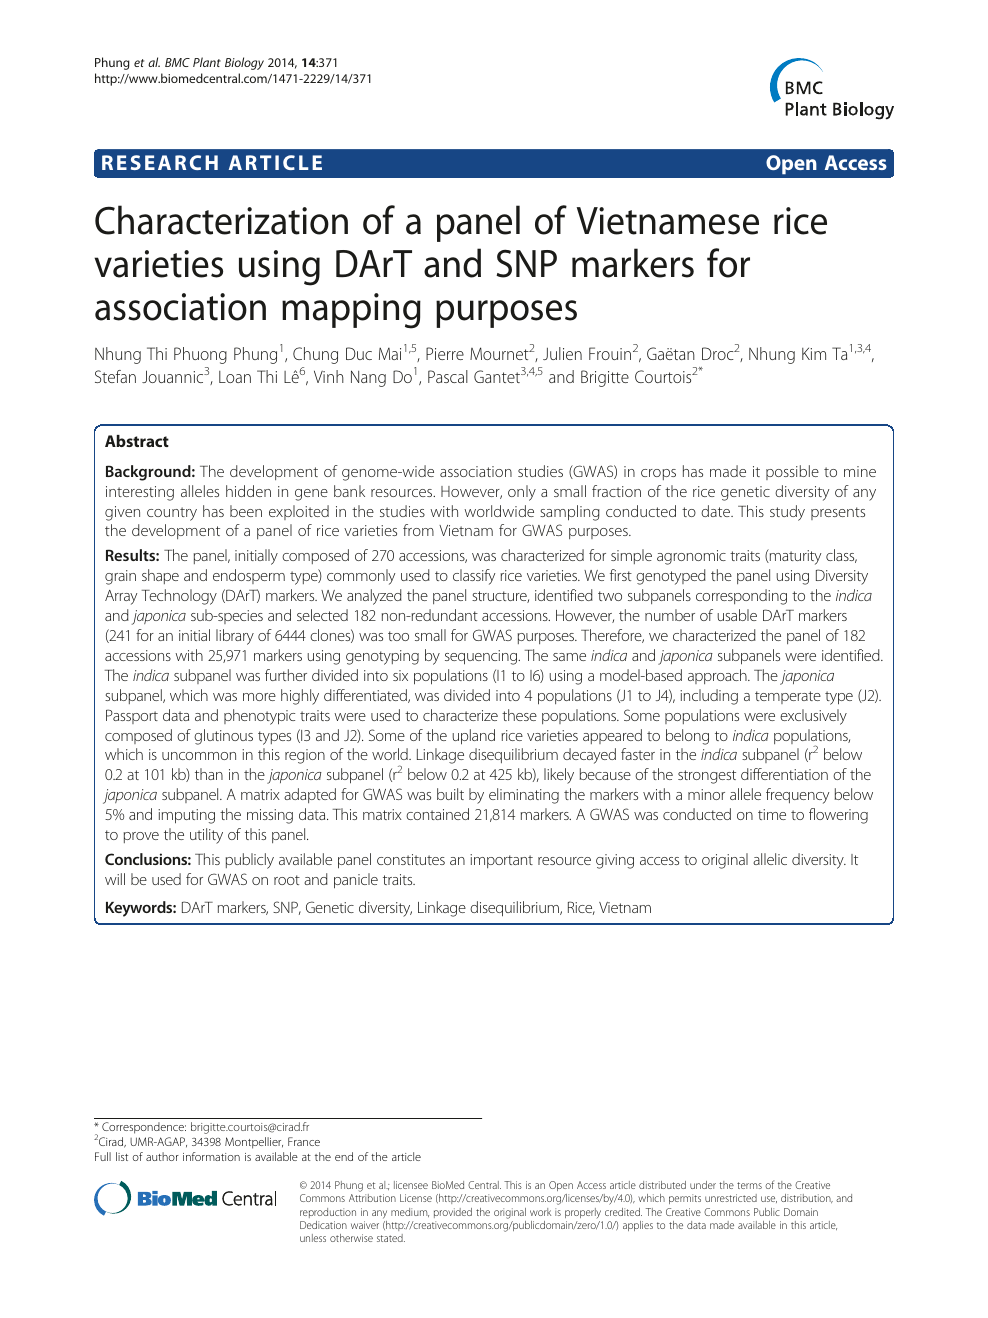 Characterization of a panel of Vietnamese rice varieties using 